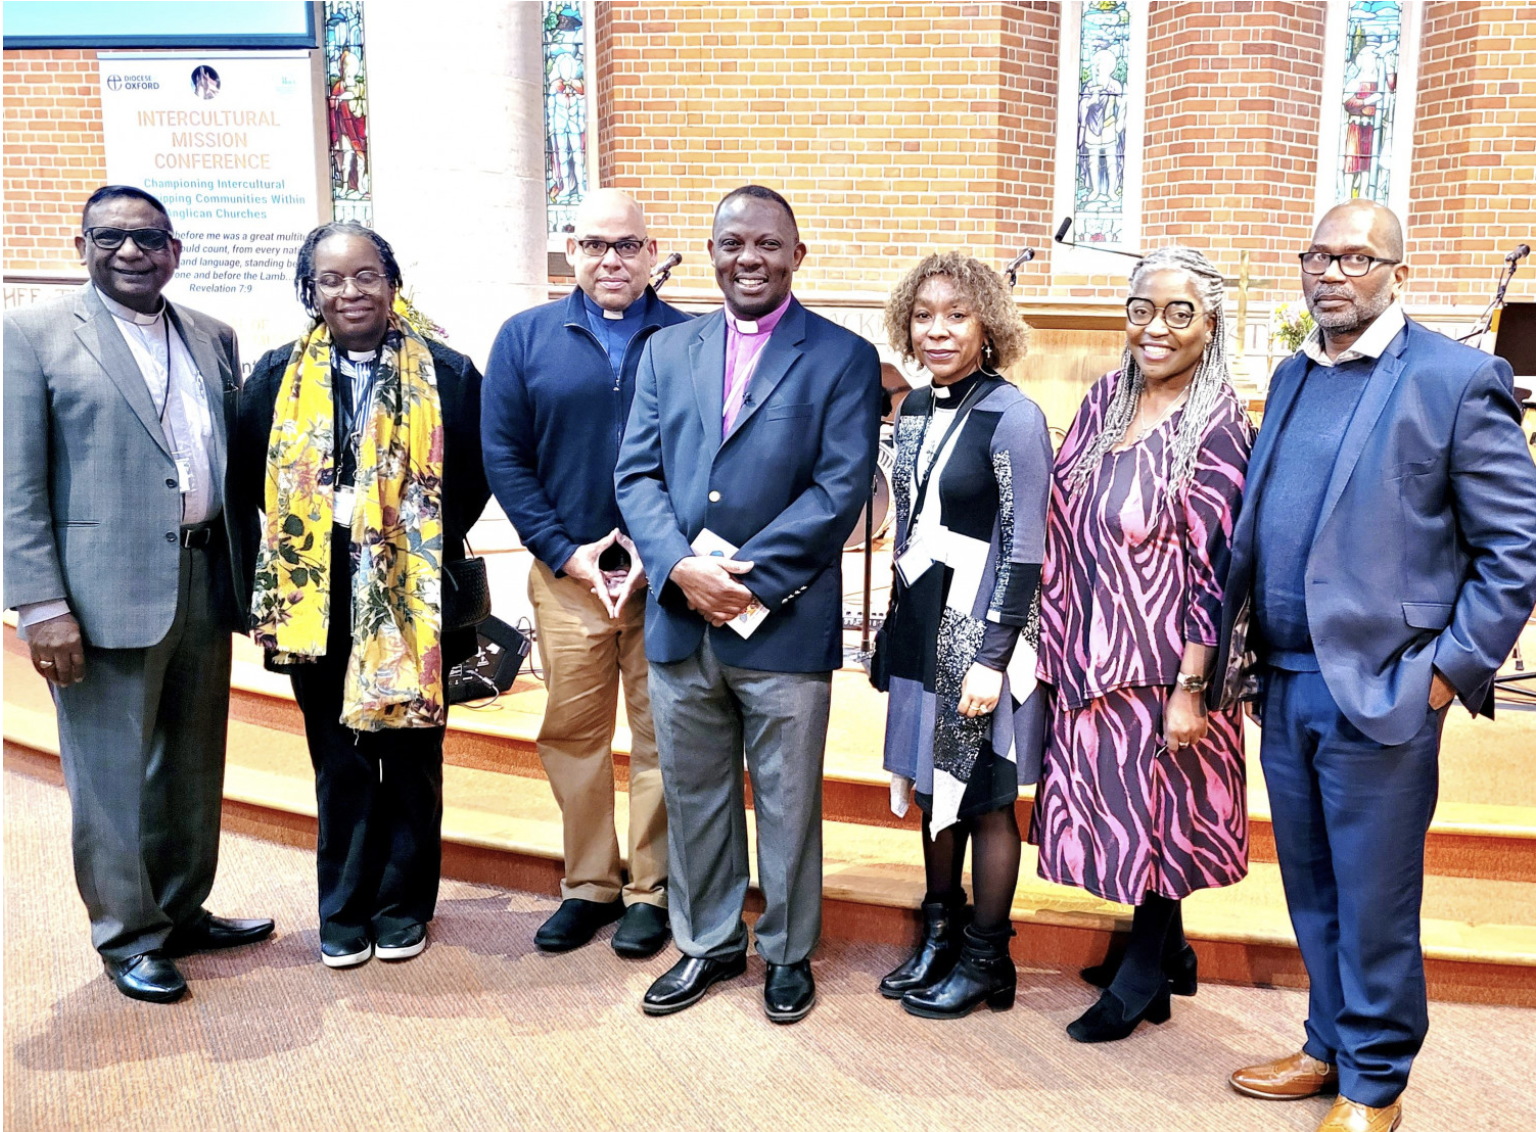 Members of Lichfield's RJITG and others: Gilbert David, Sharon Prentis, Guy Hewitt (Church of England Director of Racial Justice) Rt Revd Dr Tim Wambunya (Conference Chair) Jassica Castillo-Burley, Debbie Parkes and Andy Wynter